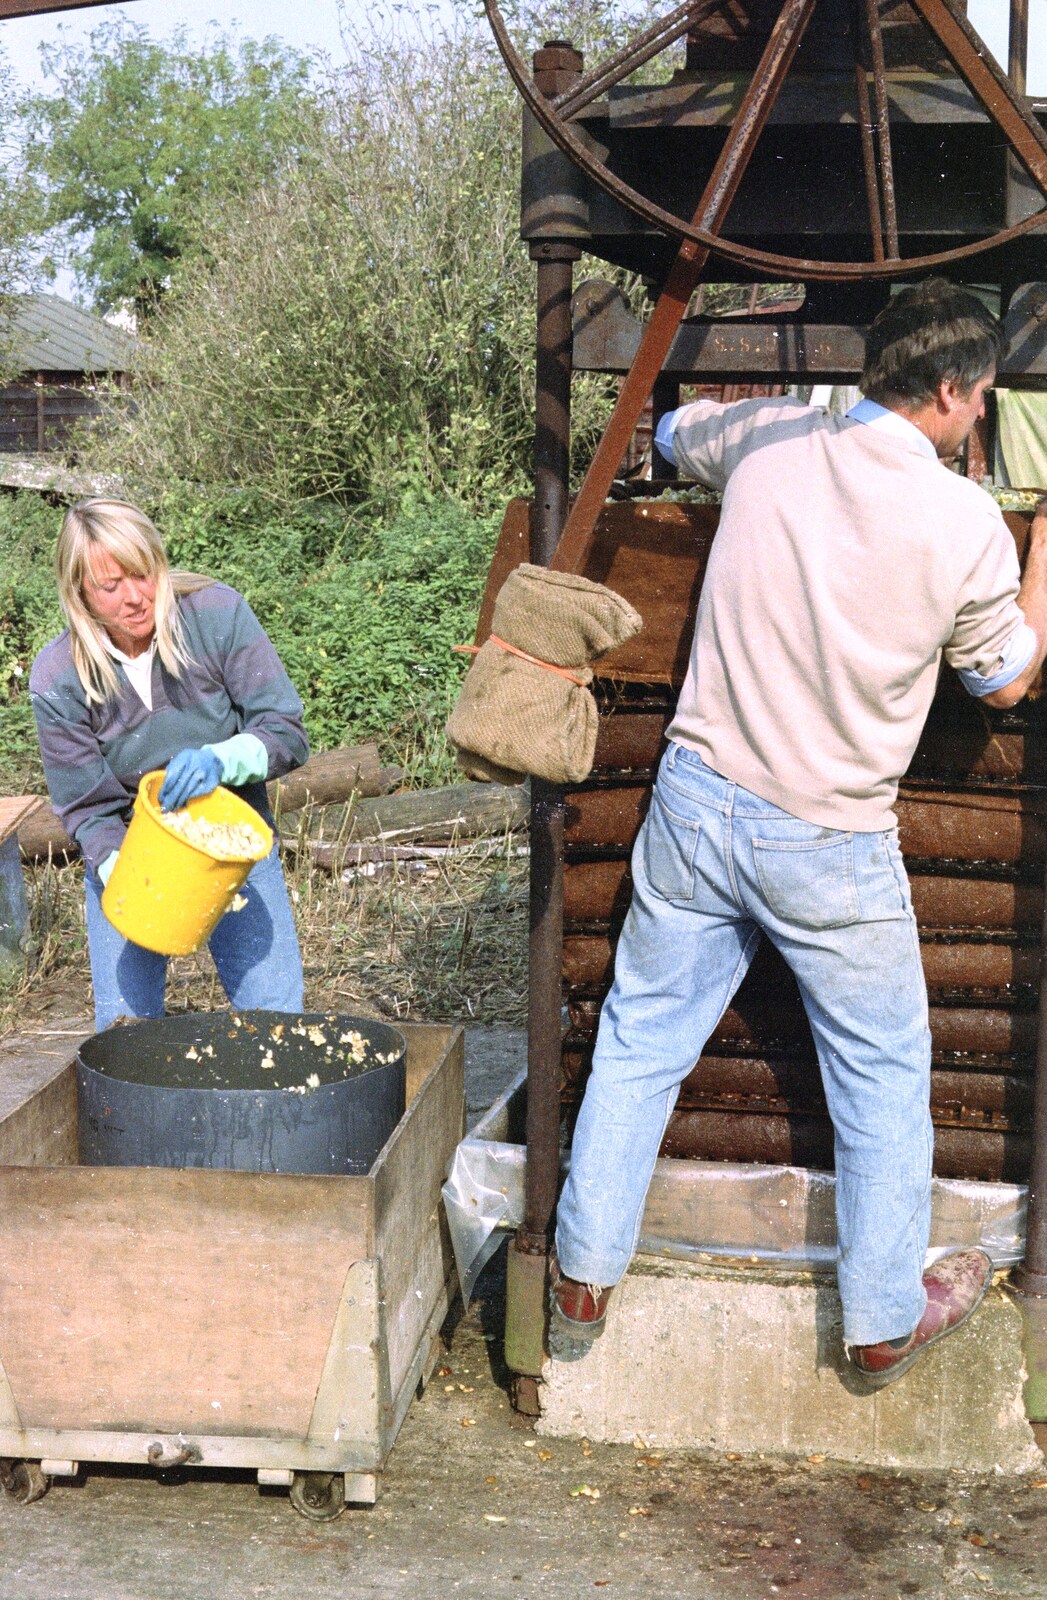 Cider Making (without Rosie), Stuston, Suffolk - 23rd September 1994: Sue scoops apple up